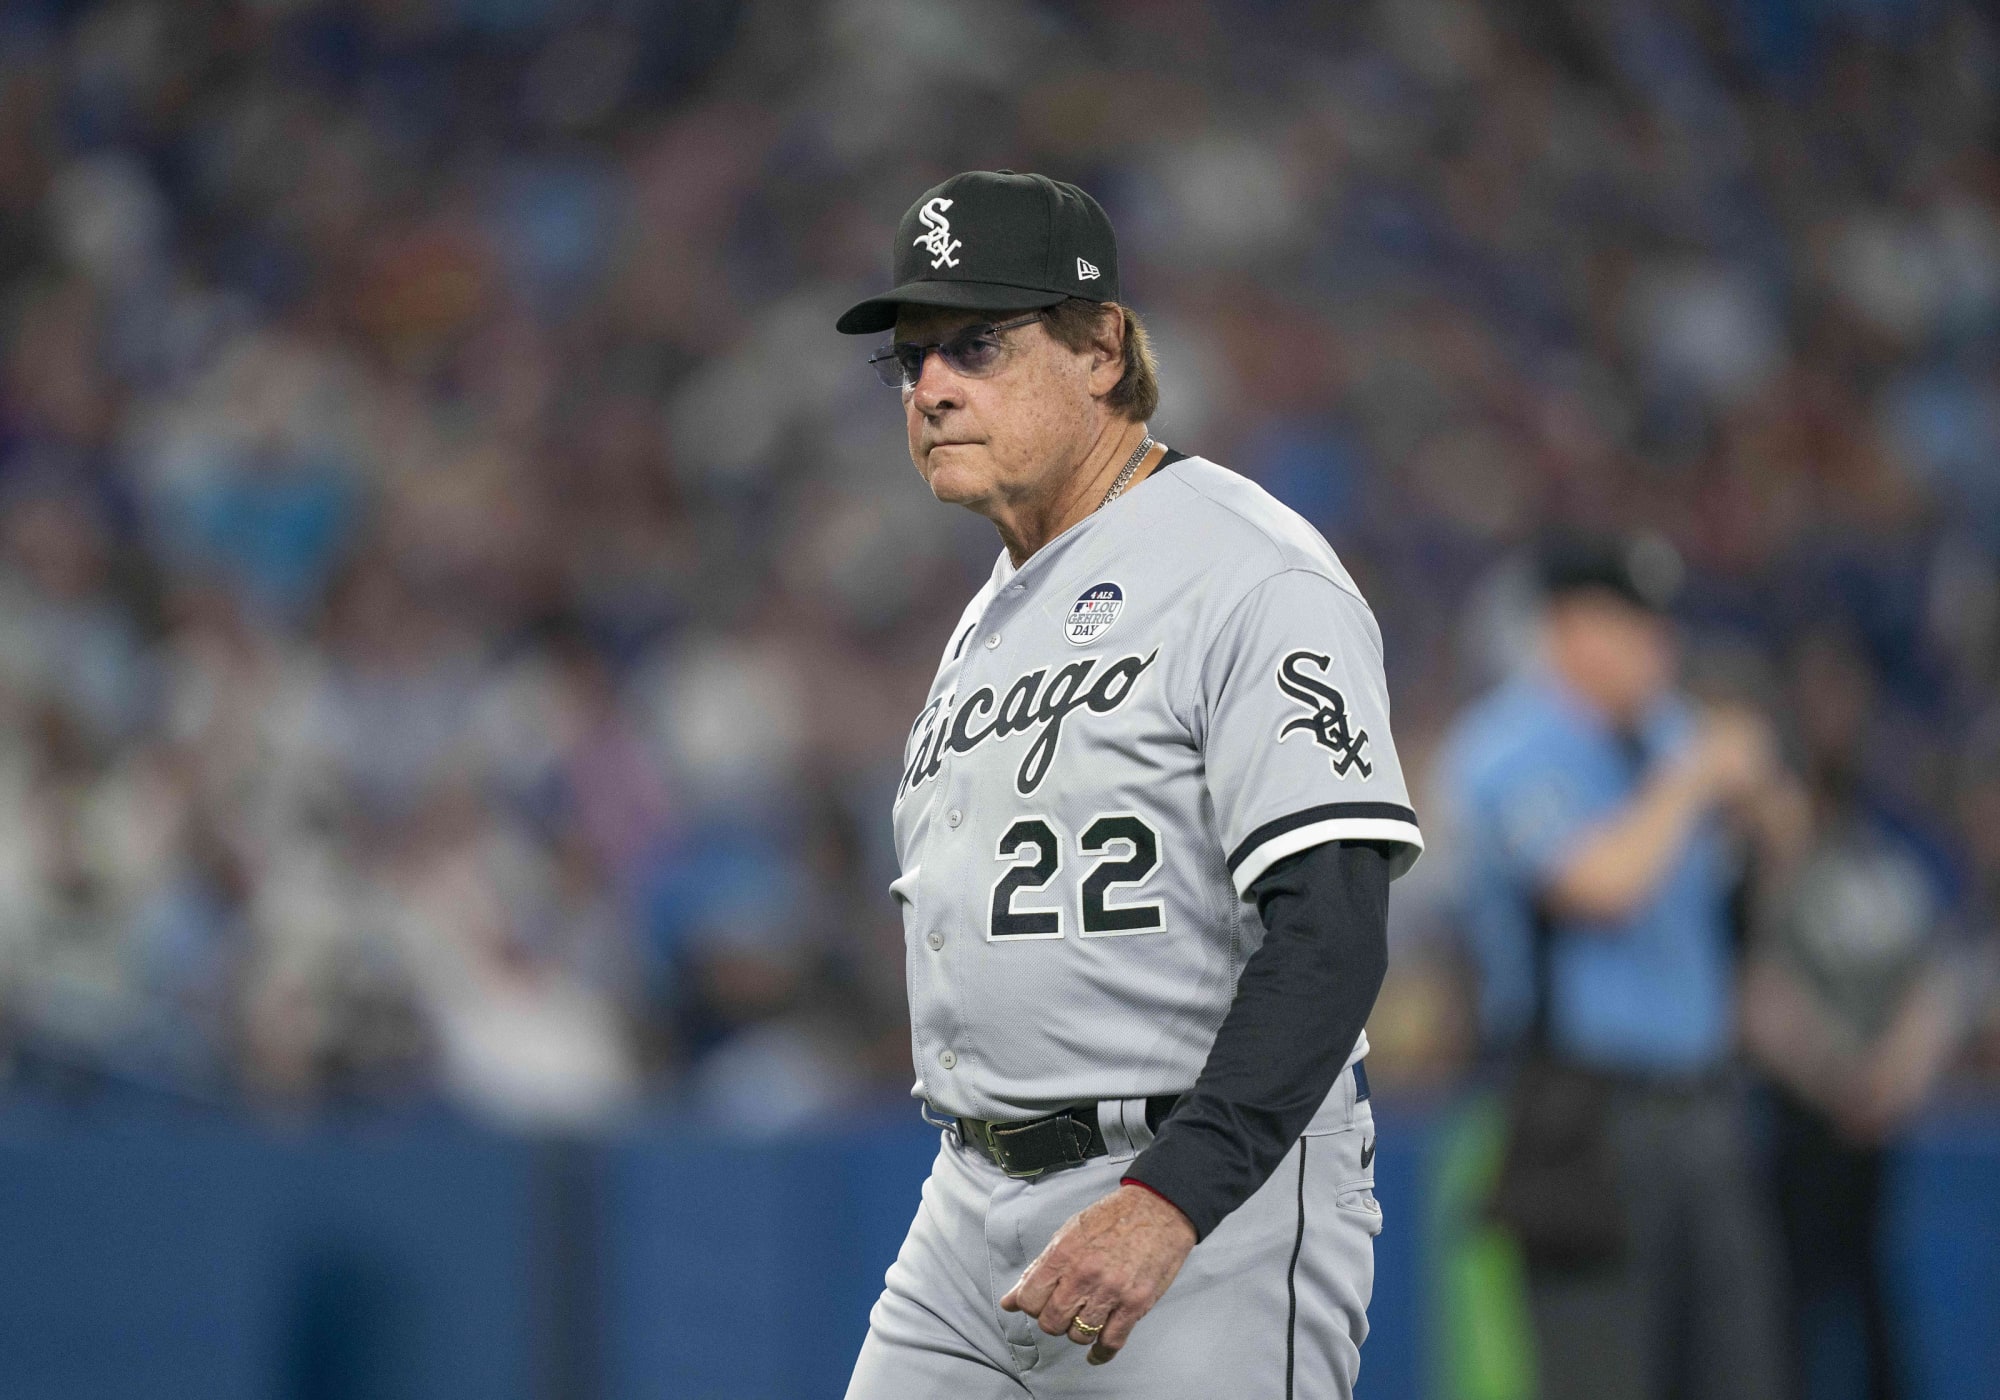 MLB: Somebody Finally Punched Out the White Sox' Pierzynski - WSJ